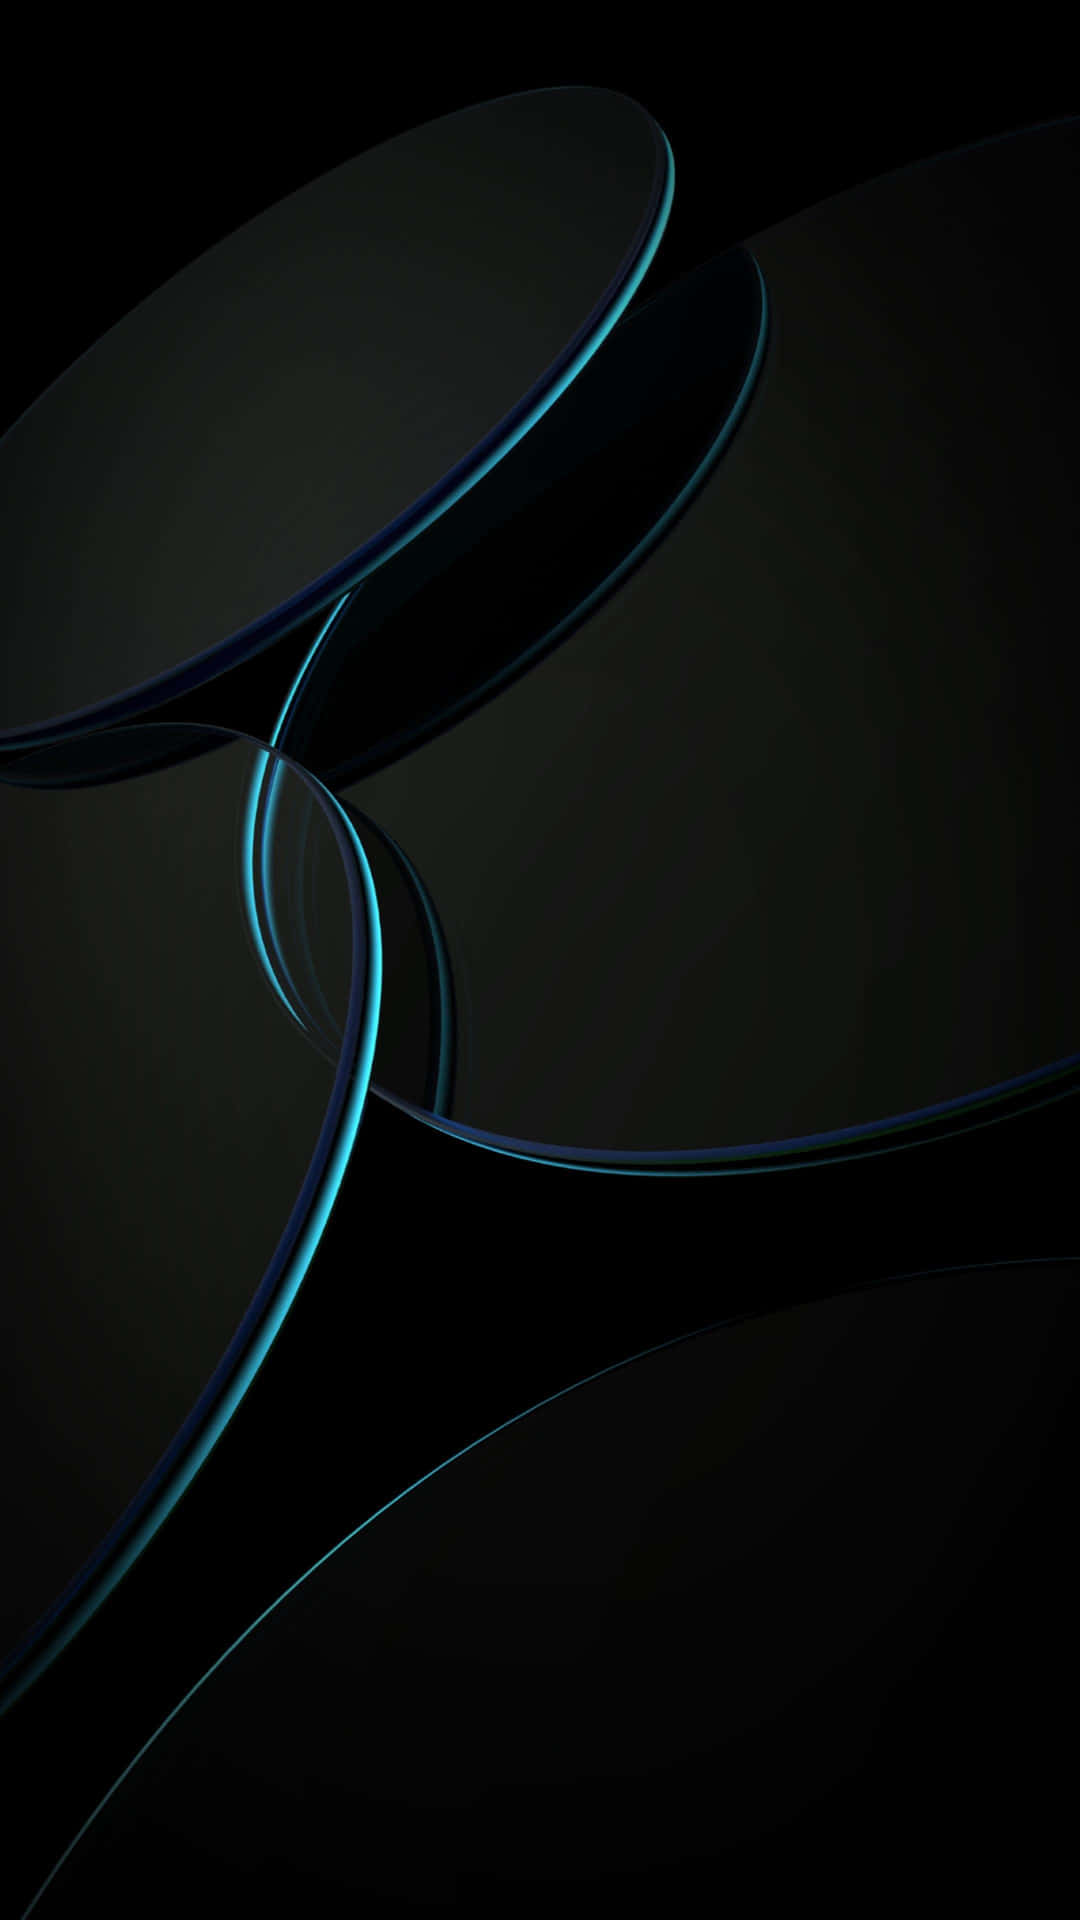 Download Black Circles With Blue Amoled Outline Wallpaper | Wallpapers.com